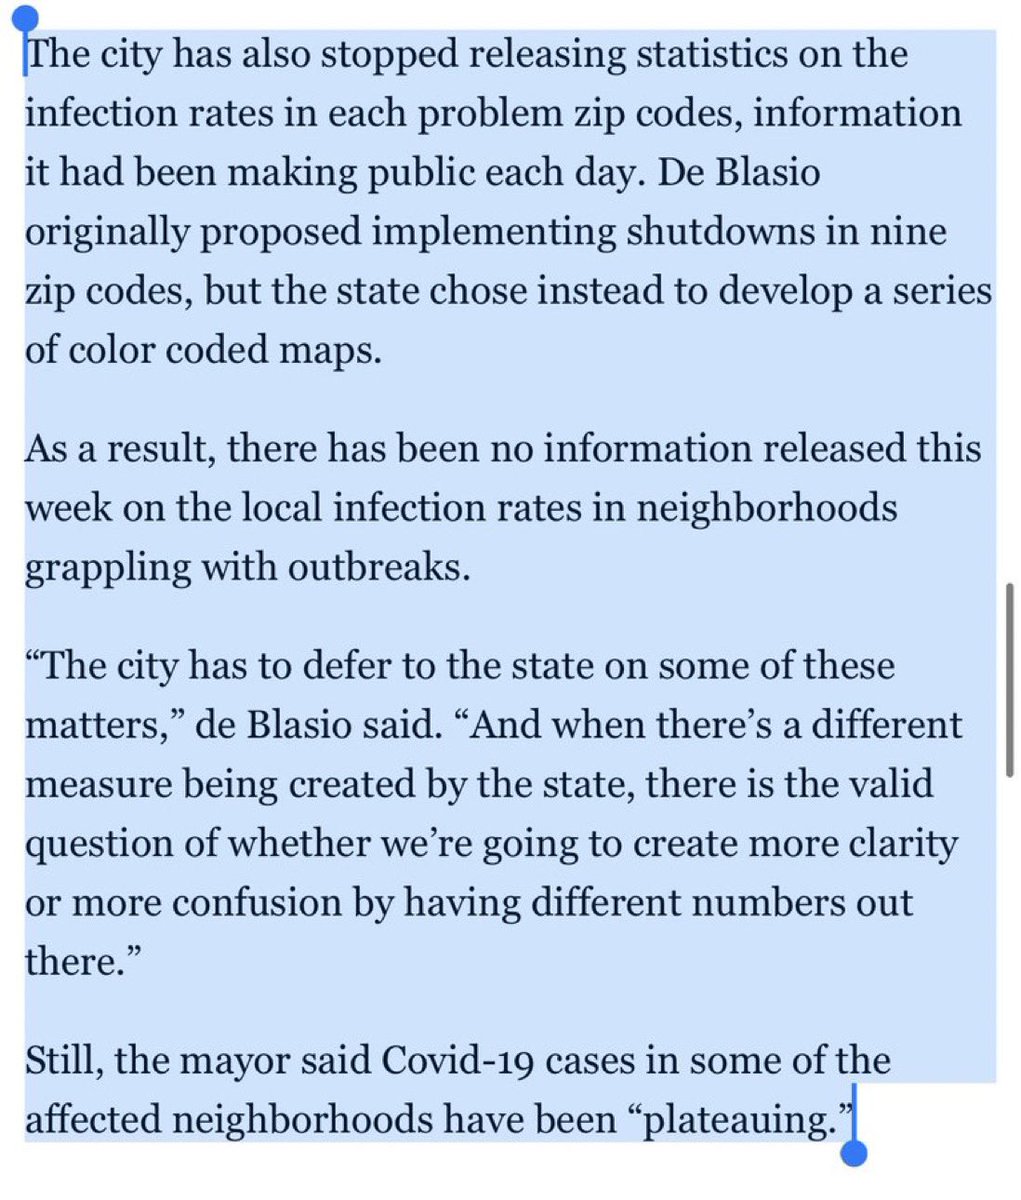 To do so, the city simply stopped releasing the same data that was used to trigger the second lockdown. No more positivity percentage for the 7-day rolling average can be found on city databases. Rather only a 28 day (!) average.  https://www.politico.com/states/new-york/city-hall/story/2020/10/15/de-blasio-pushes-back-against-cuomos-funding-threat-1325323